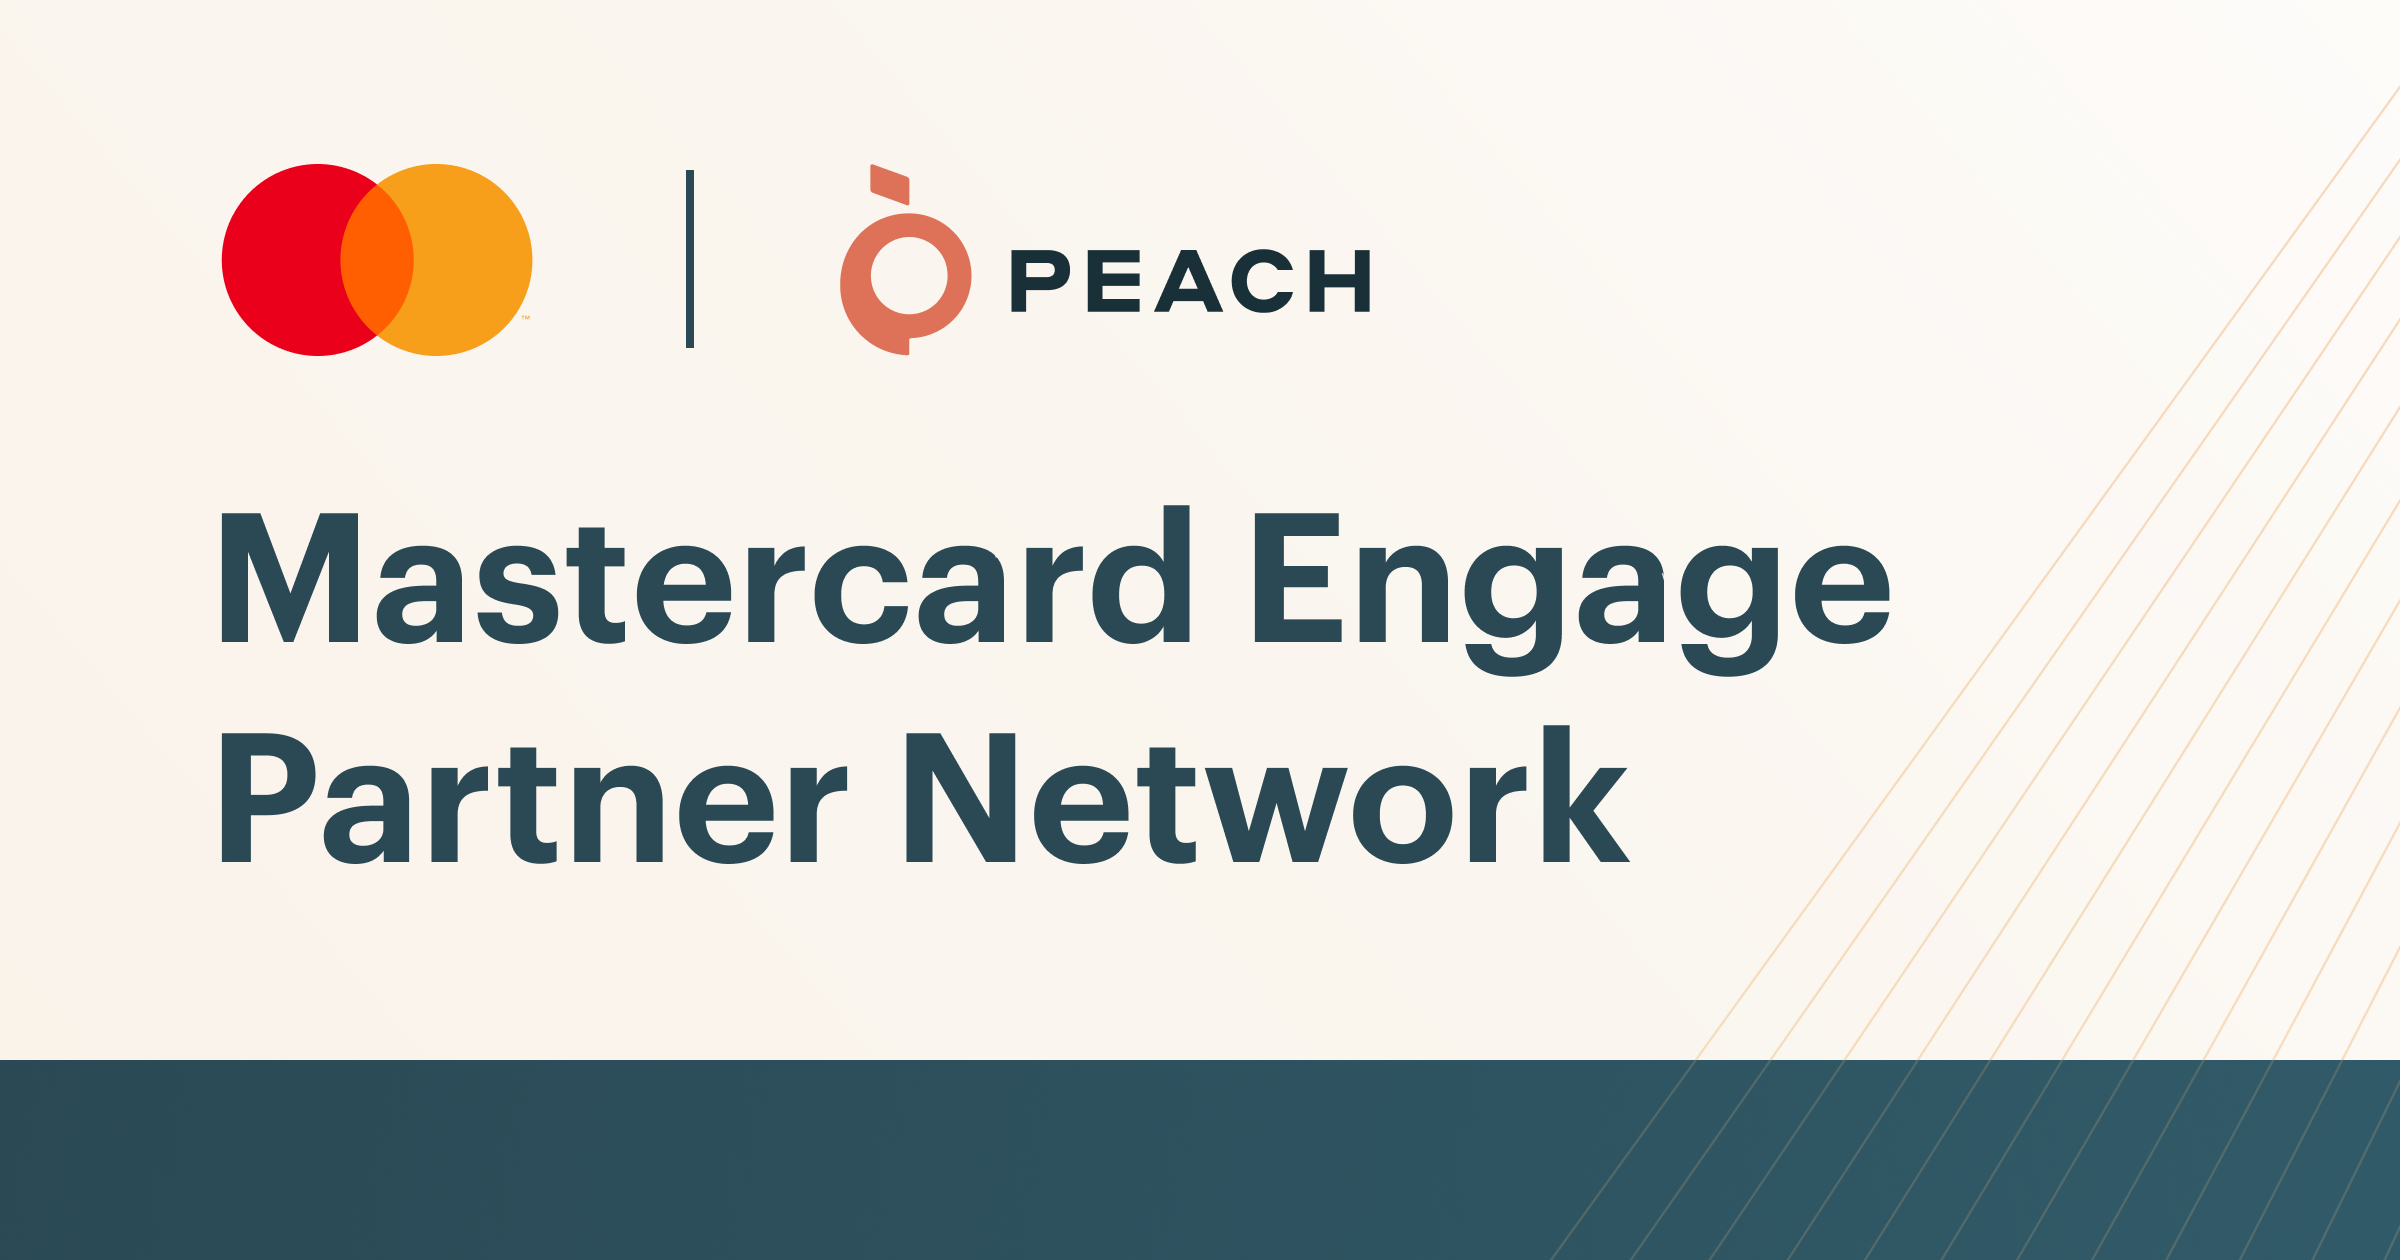 Peach joins the Mastercard Engage Partner Network as a fintech enabler